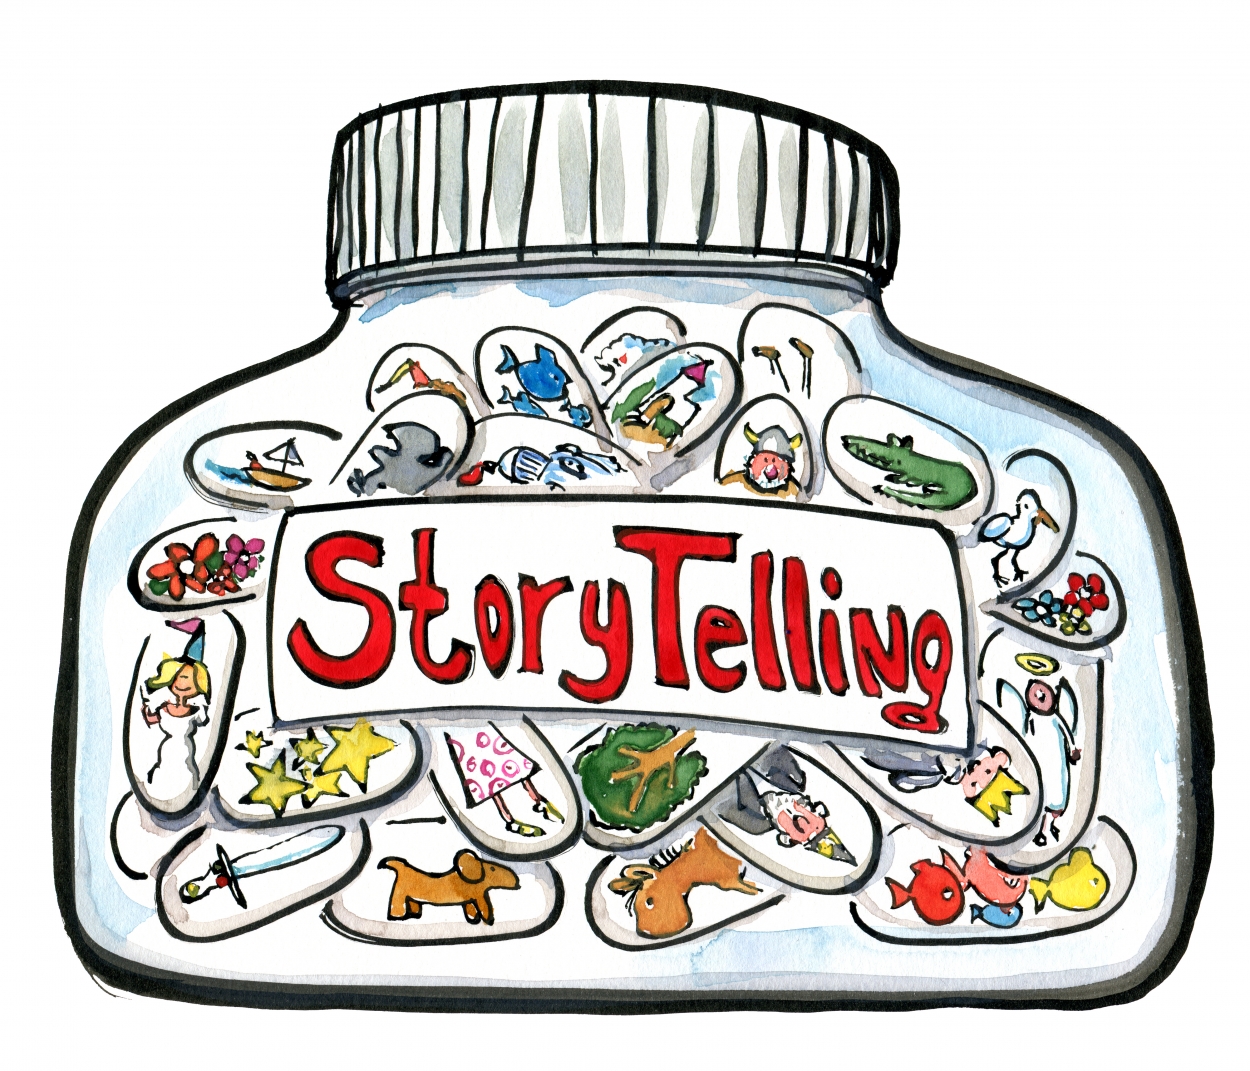 Drawing of a jar of magical storytelling Pills